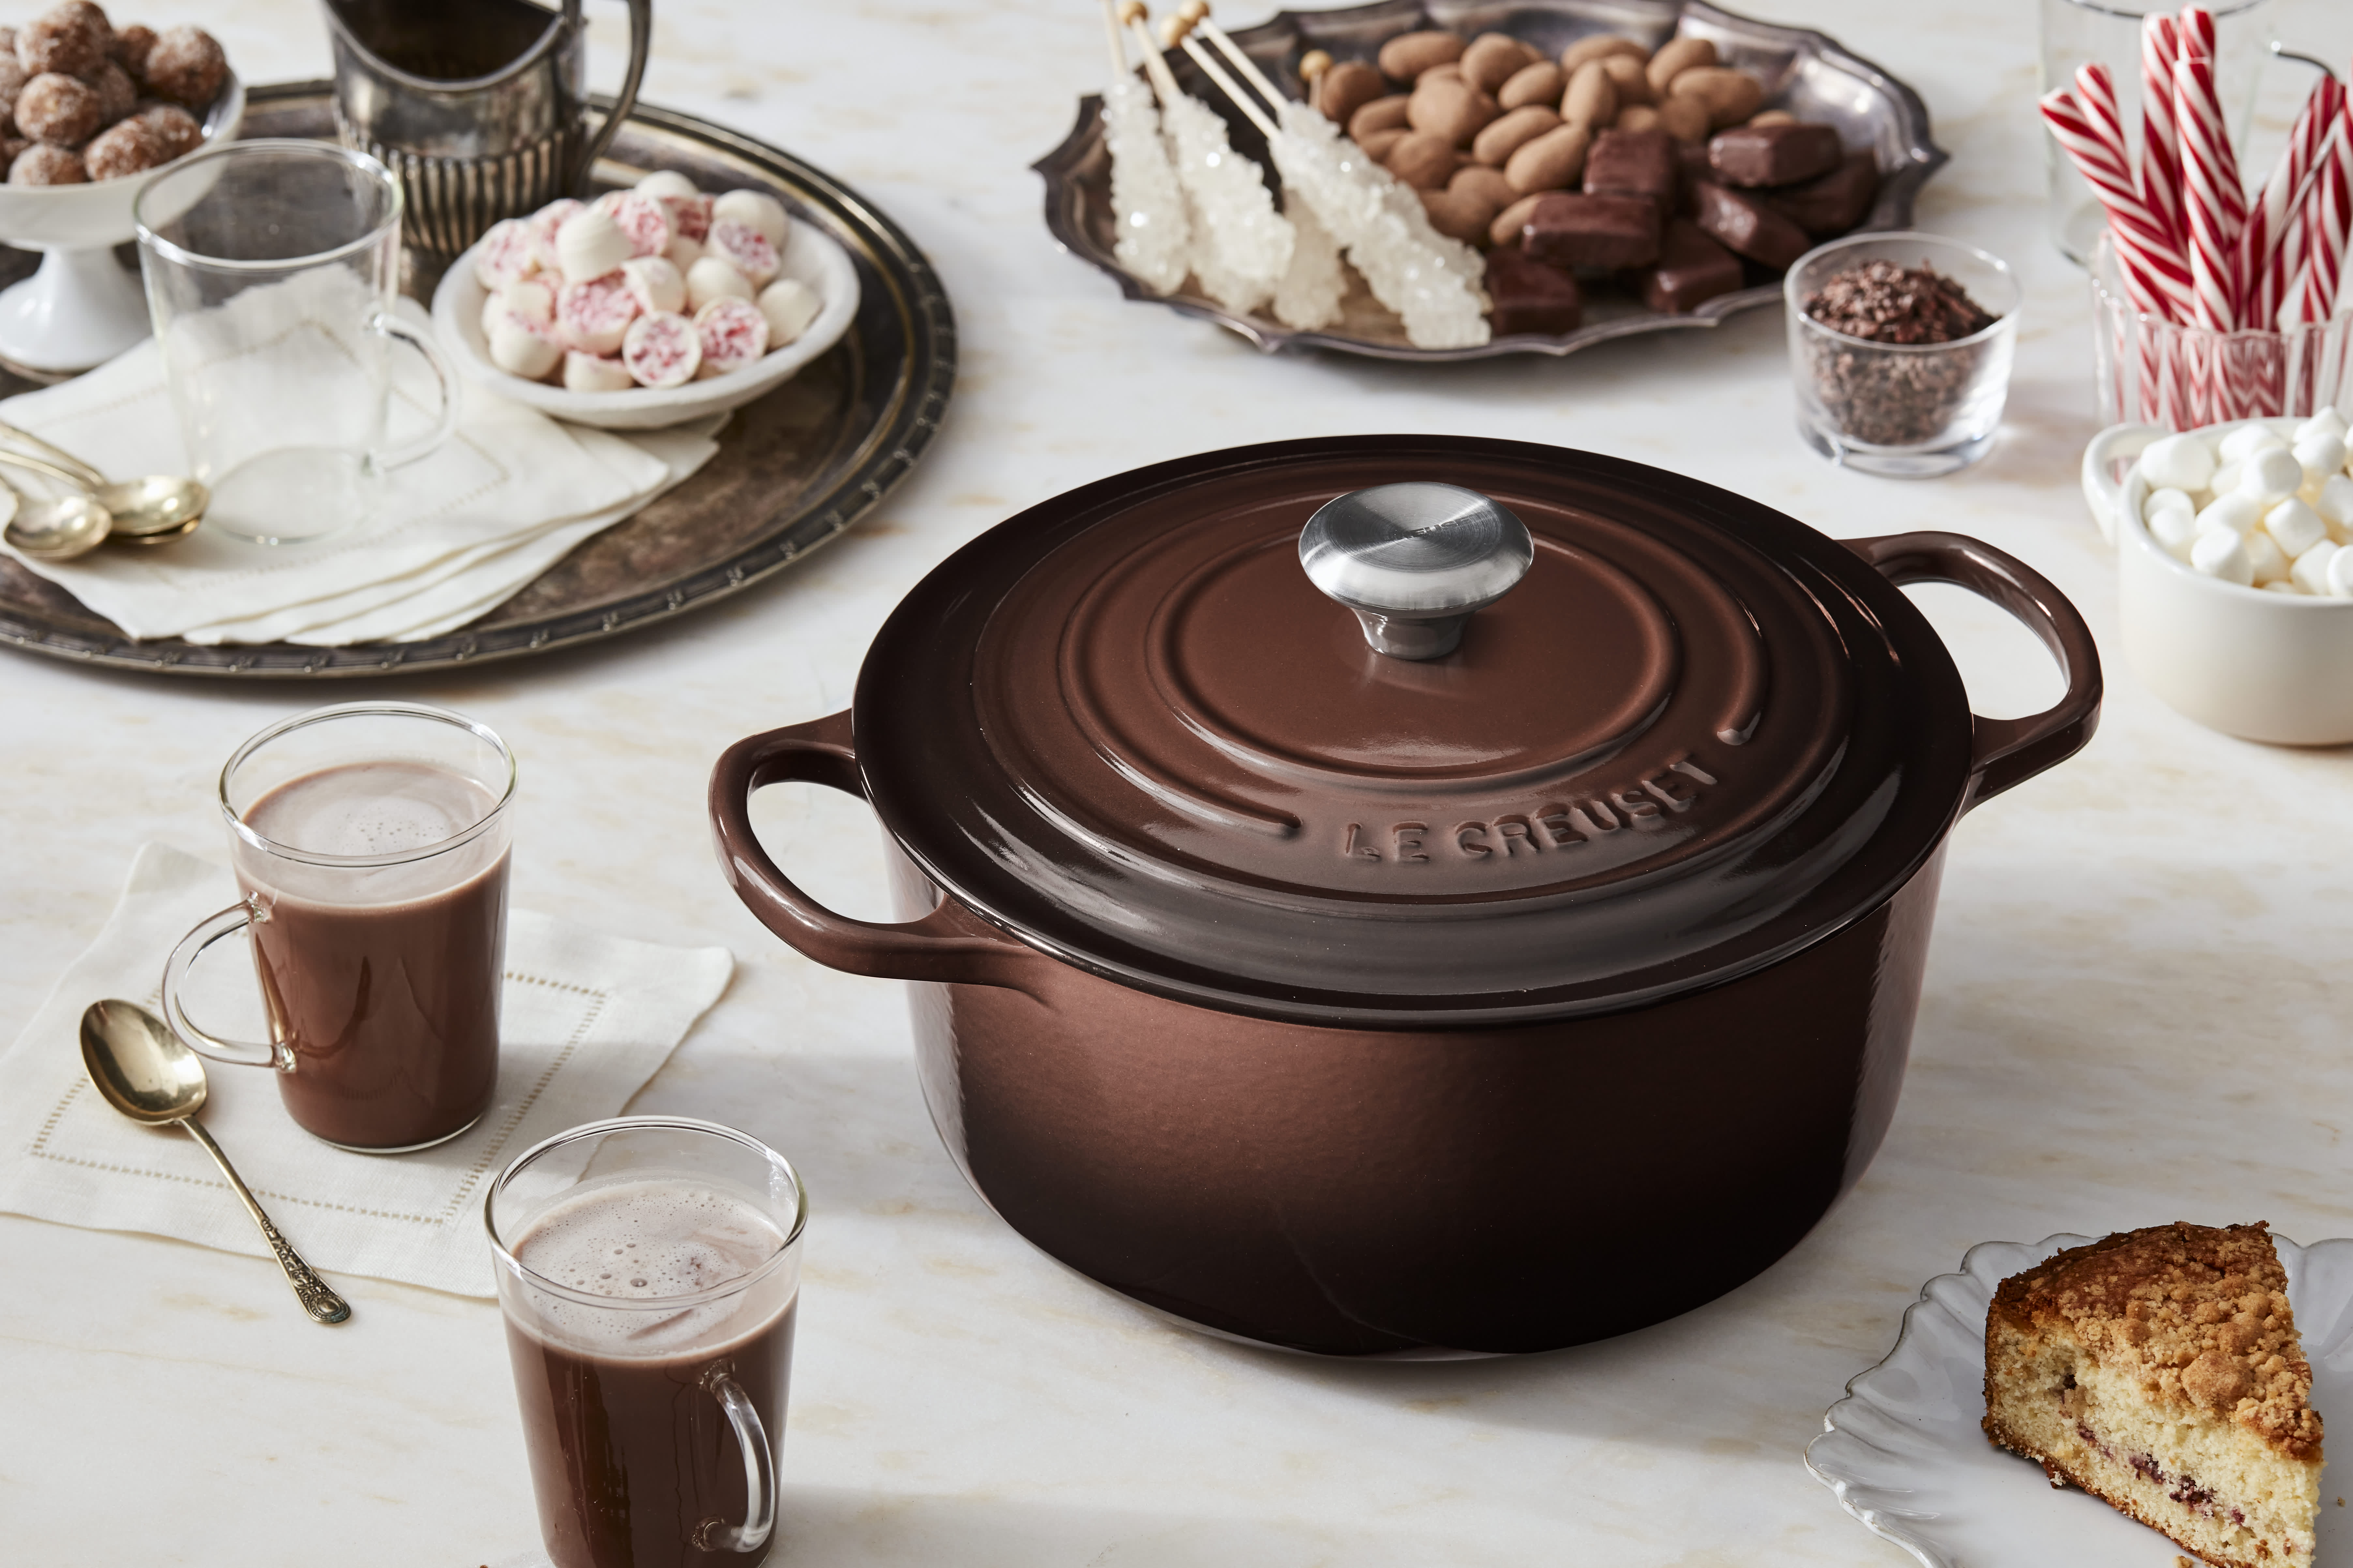 Le Creuset Launches a New Dessert-Inspired | The Kitchn